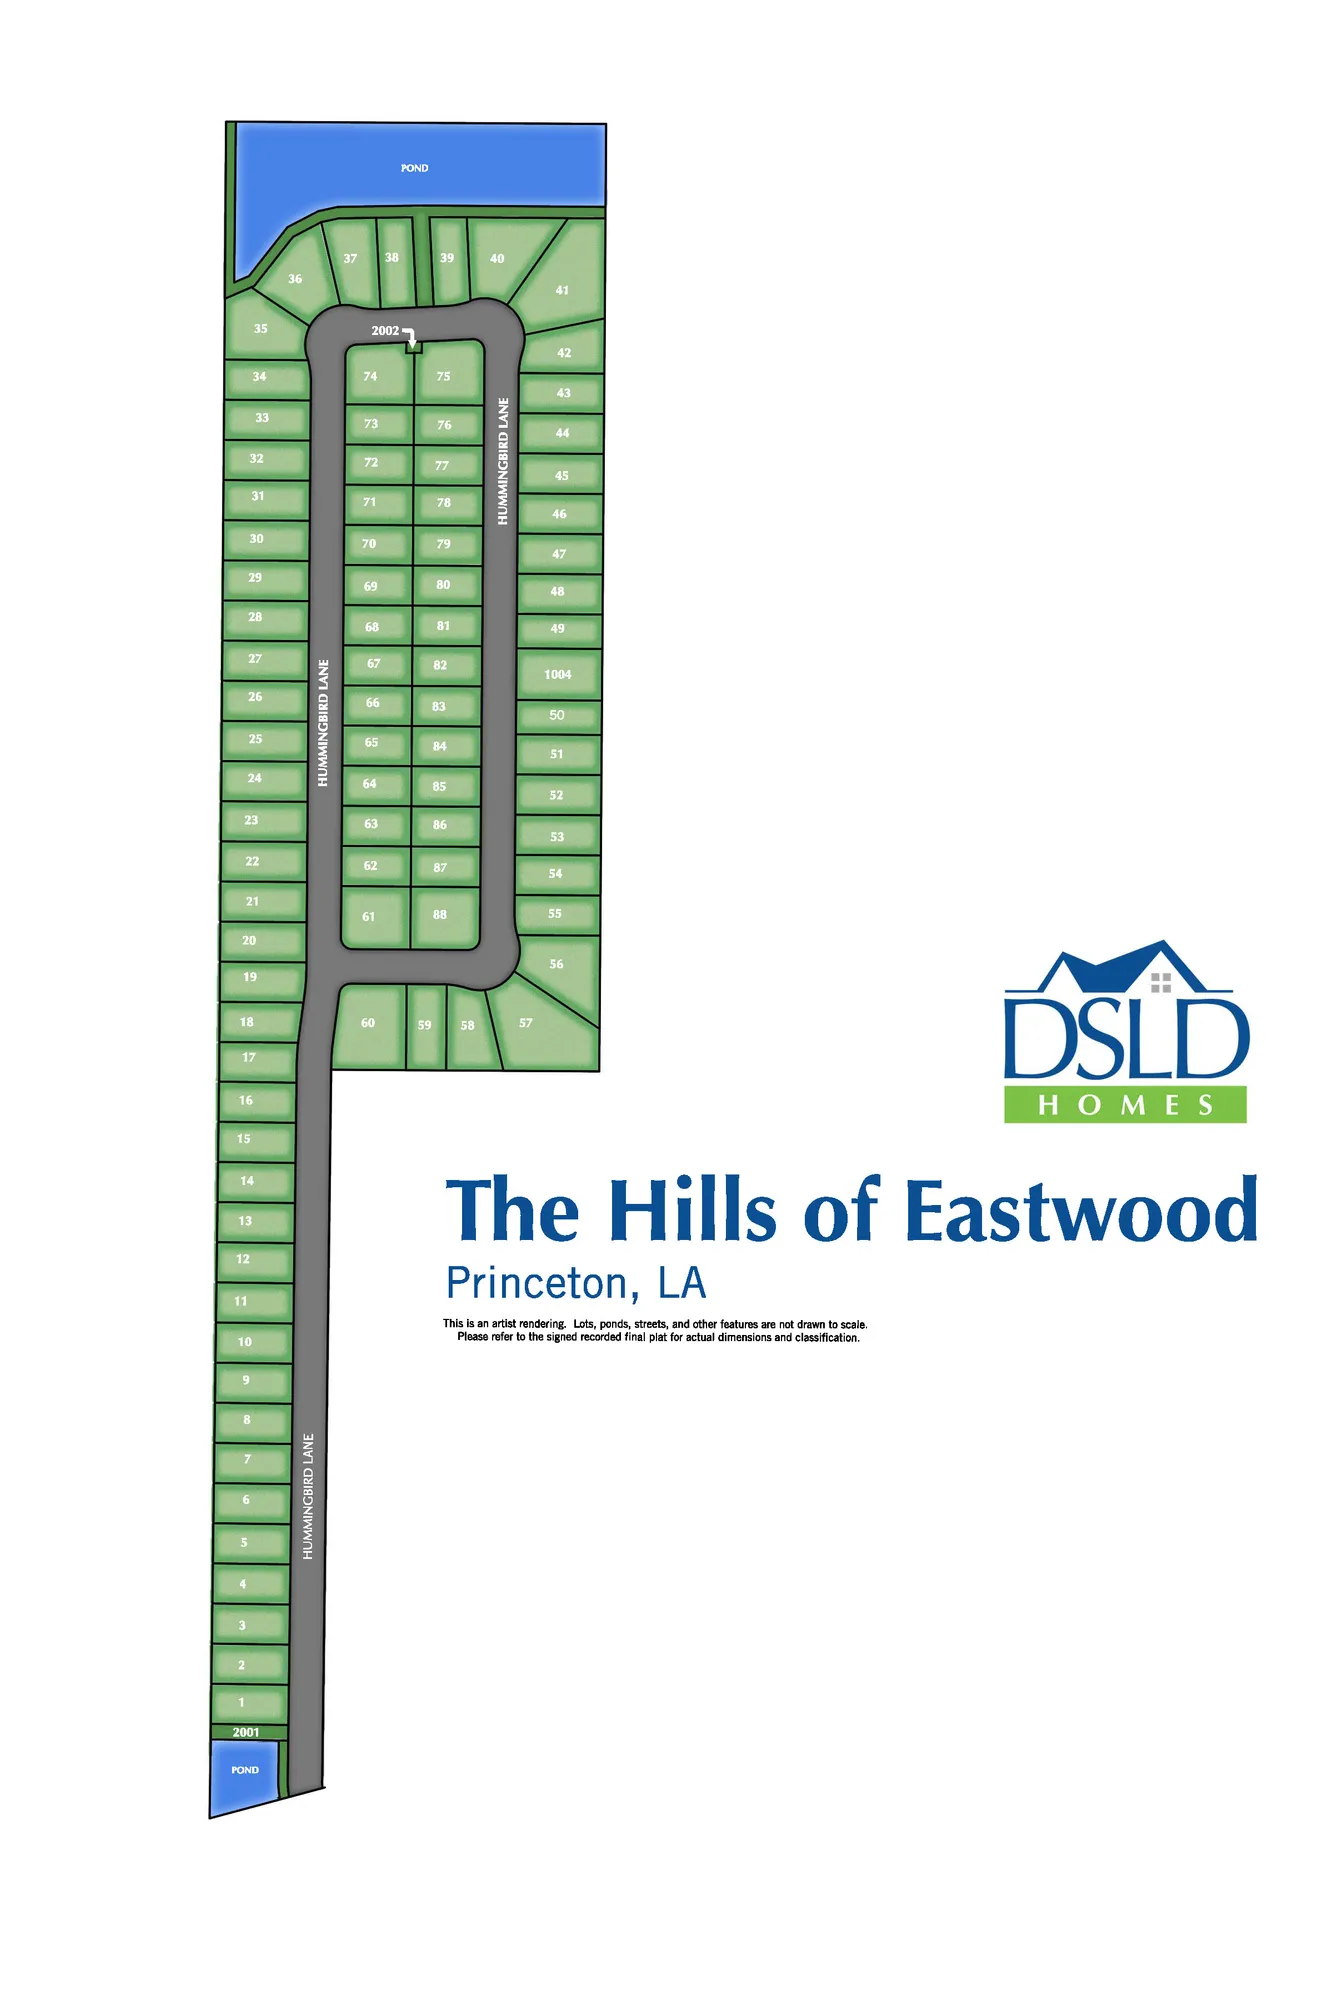 The Hills of Eastwood